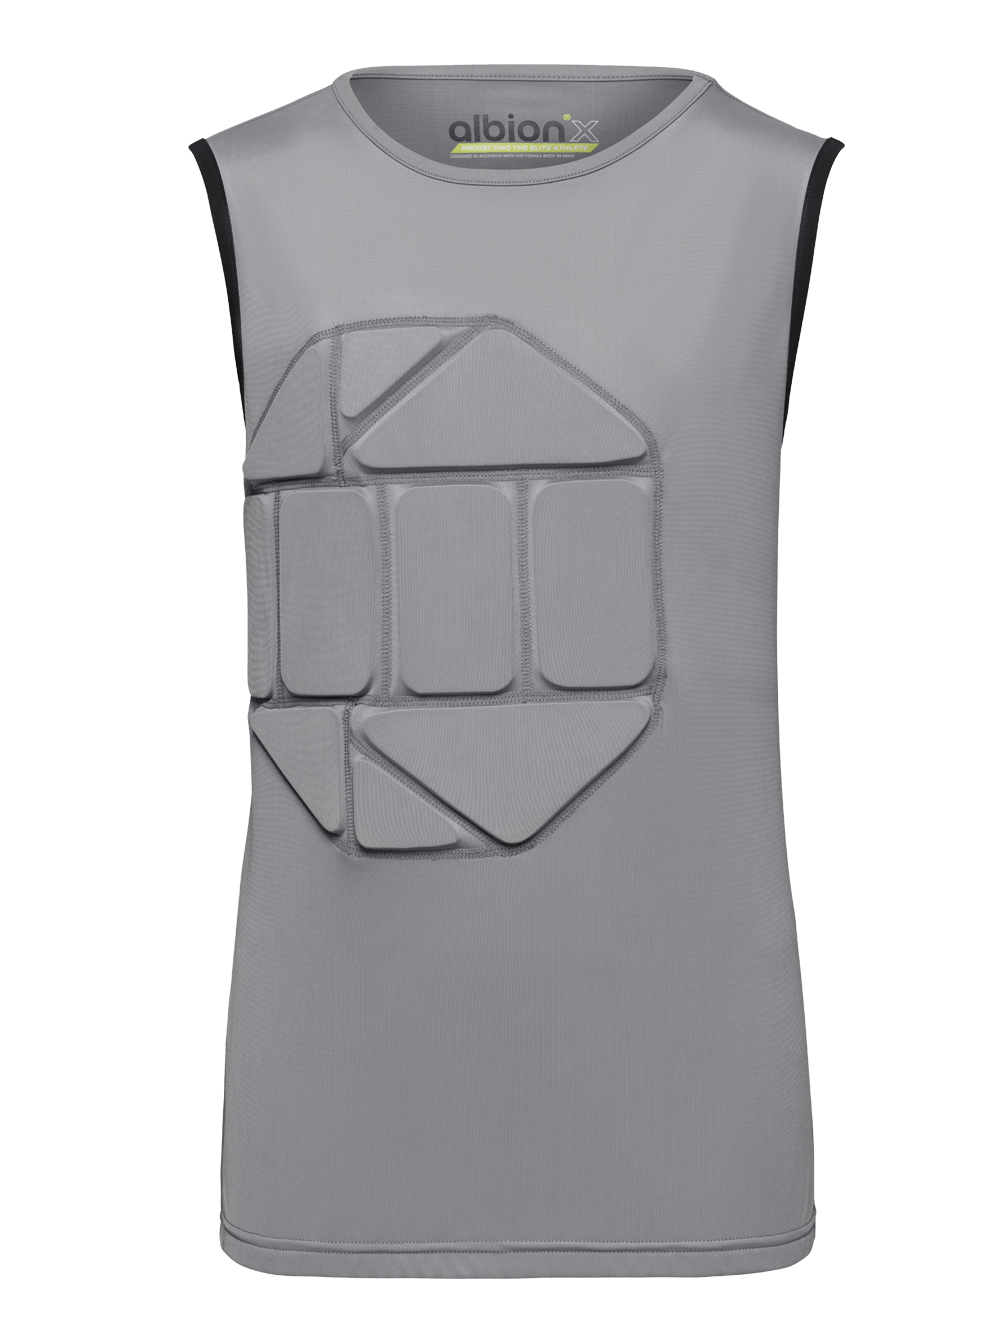 Boys Youth Cricket Impact Protection Tank Top